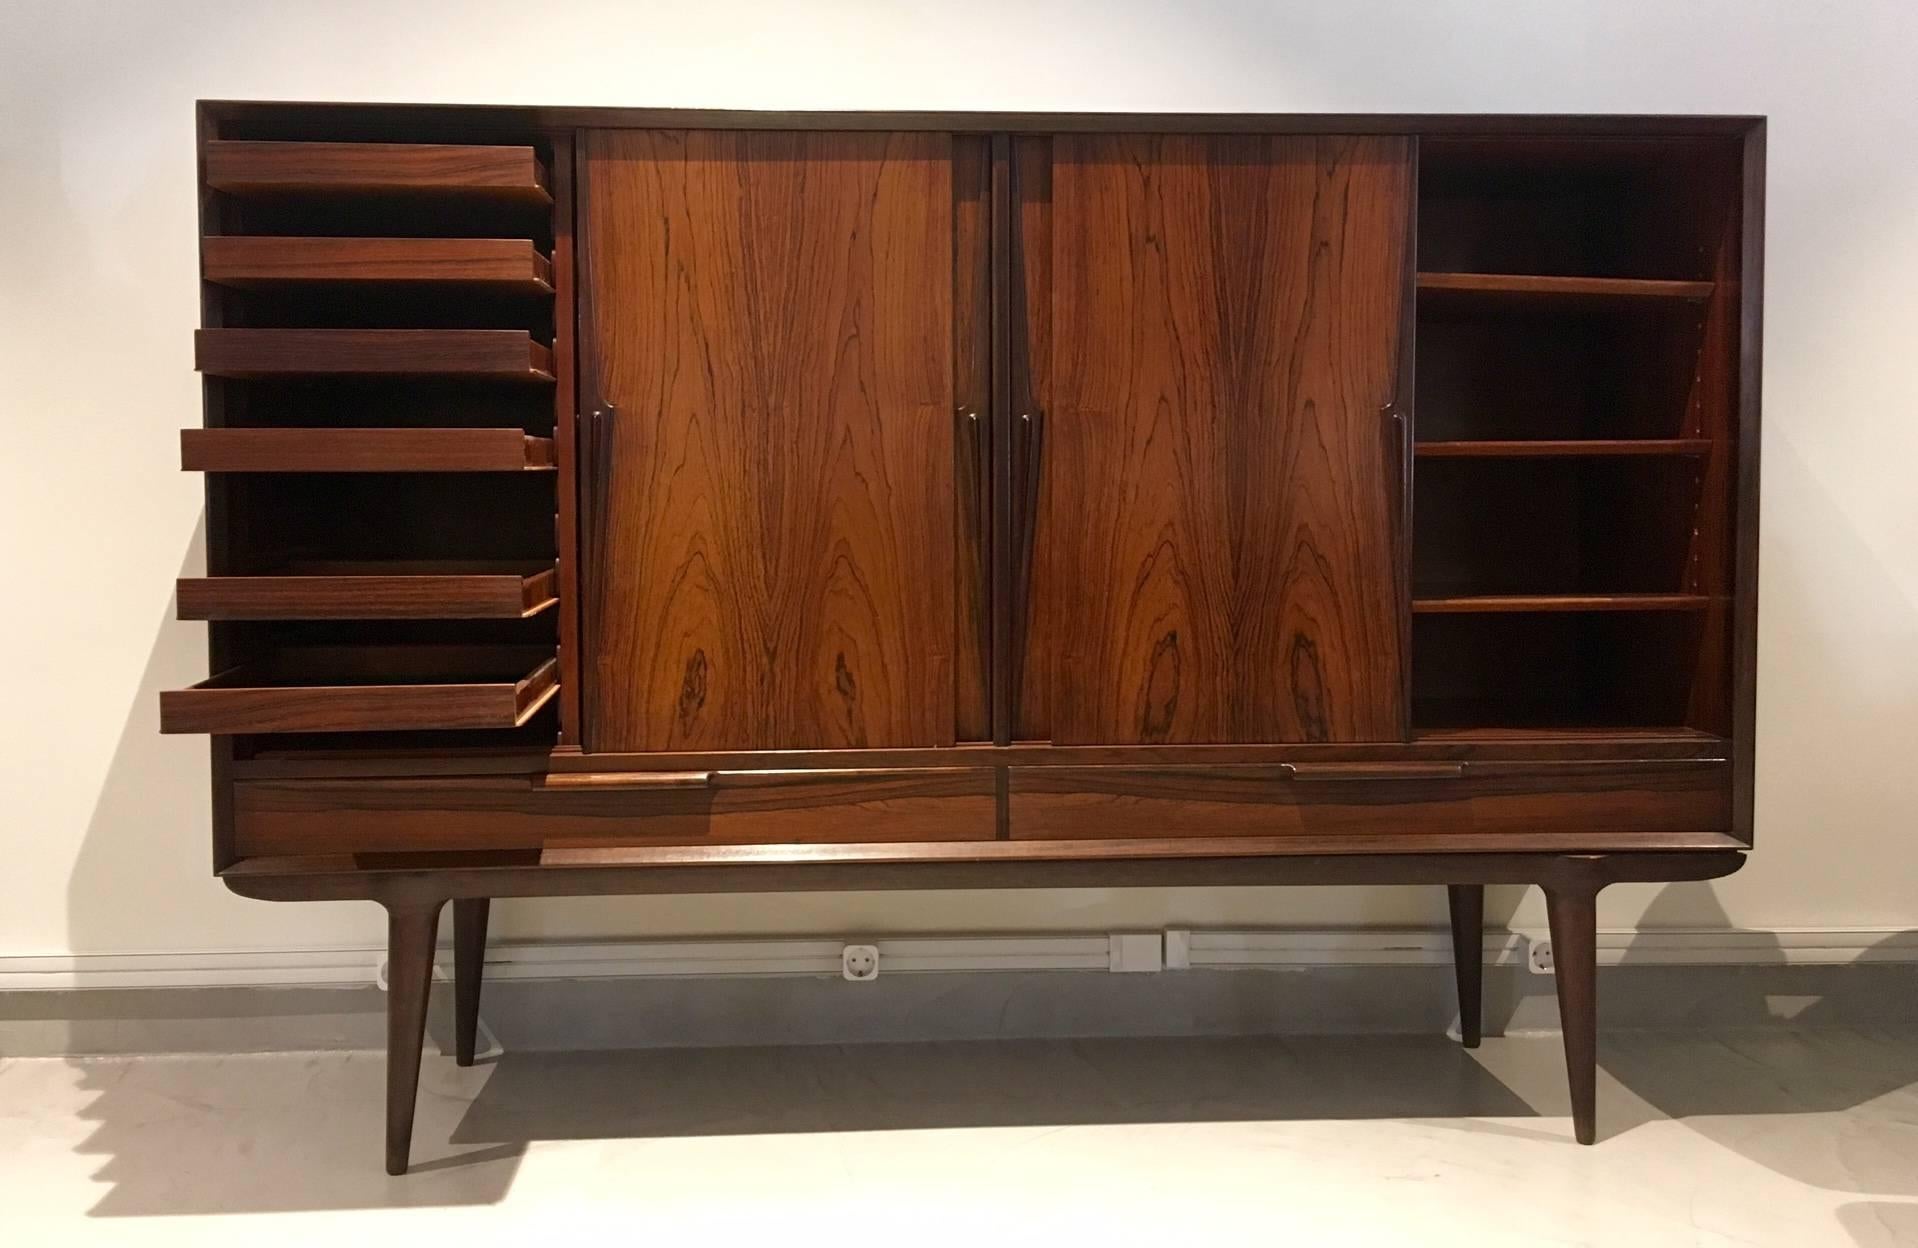 Beautiful rosewood cabinet, model 13, manufactured by Omann Jun Møbelfabrik. Four sliding doors and two drawers. Behind the right door are six felt-lined pull-out trays. Very good condition.